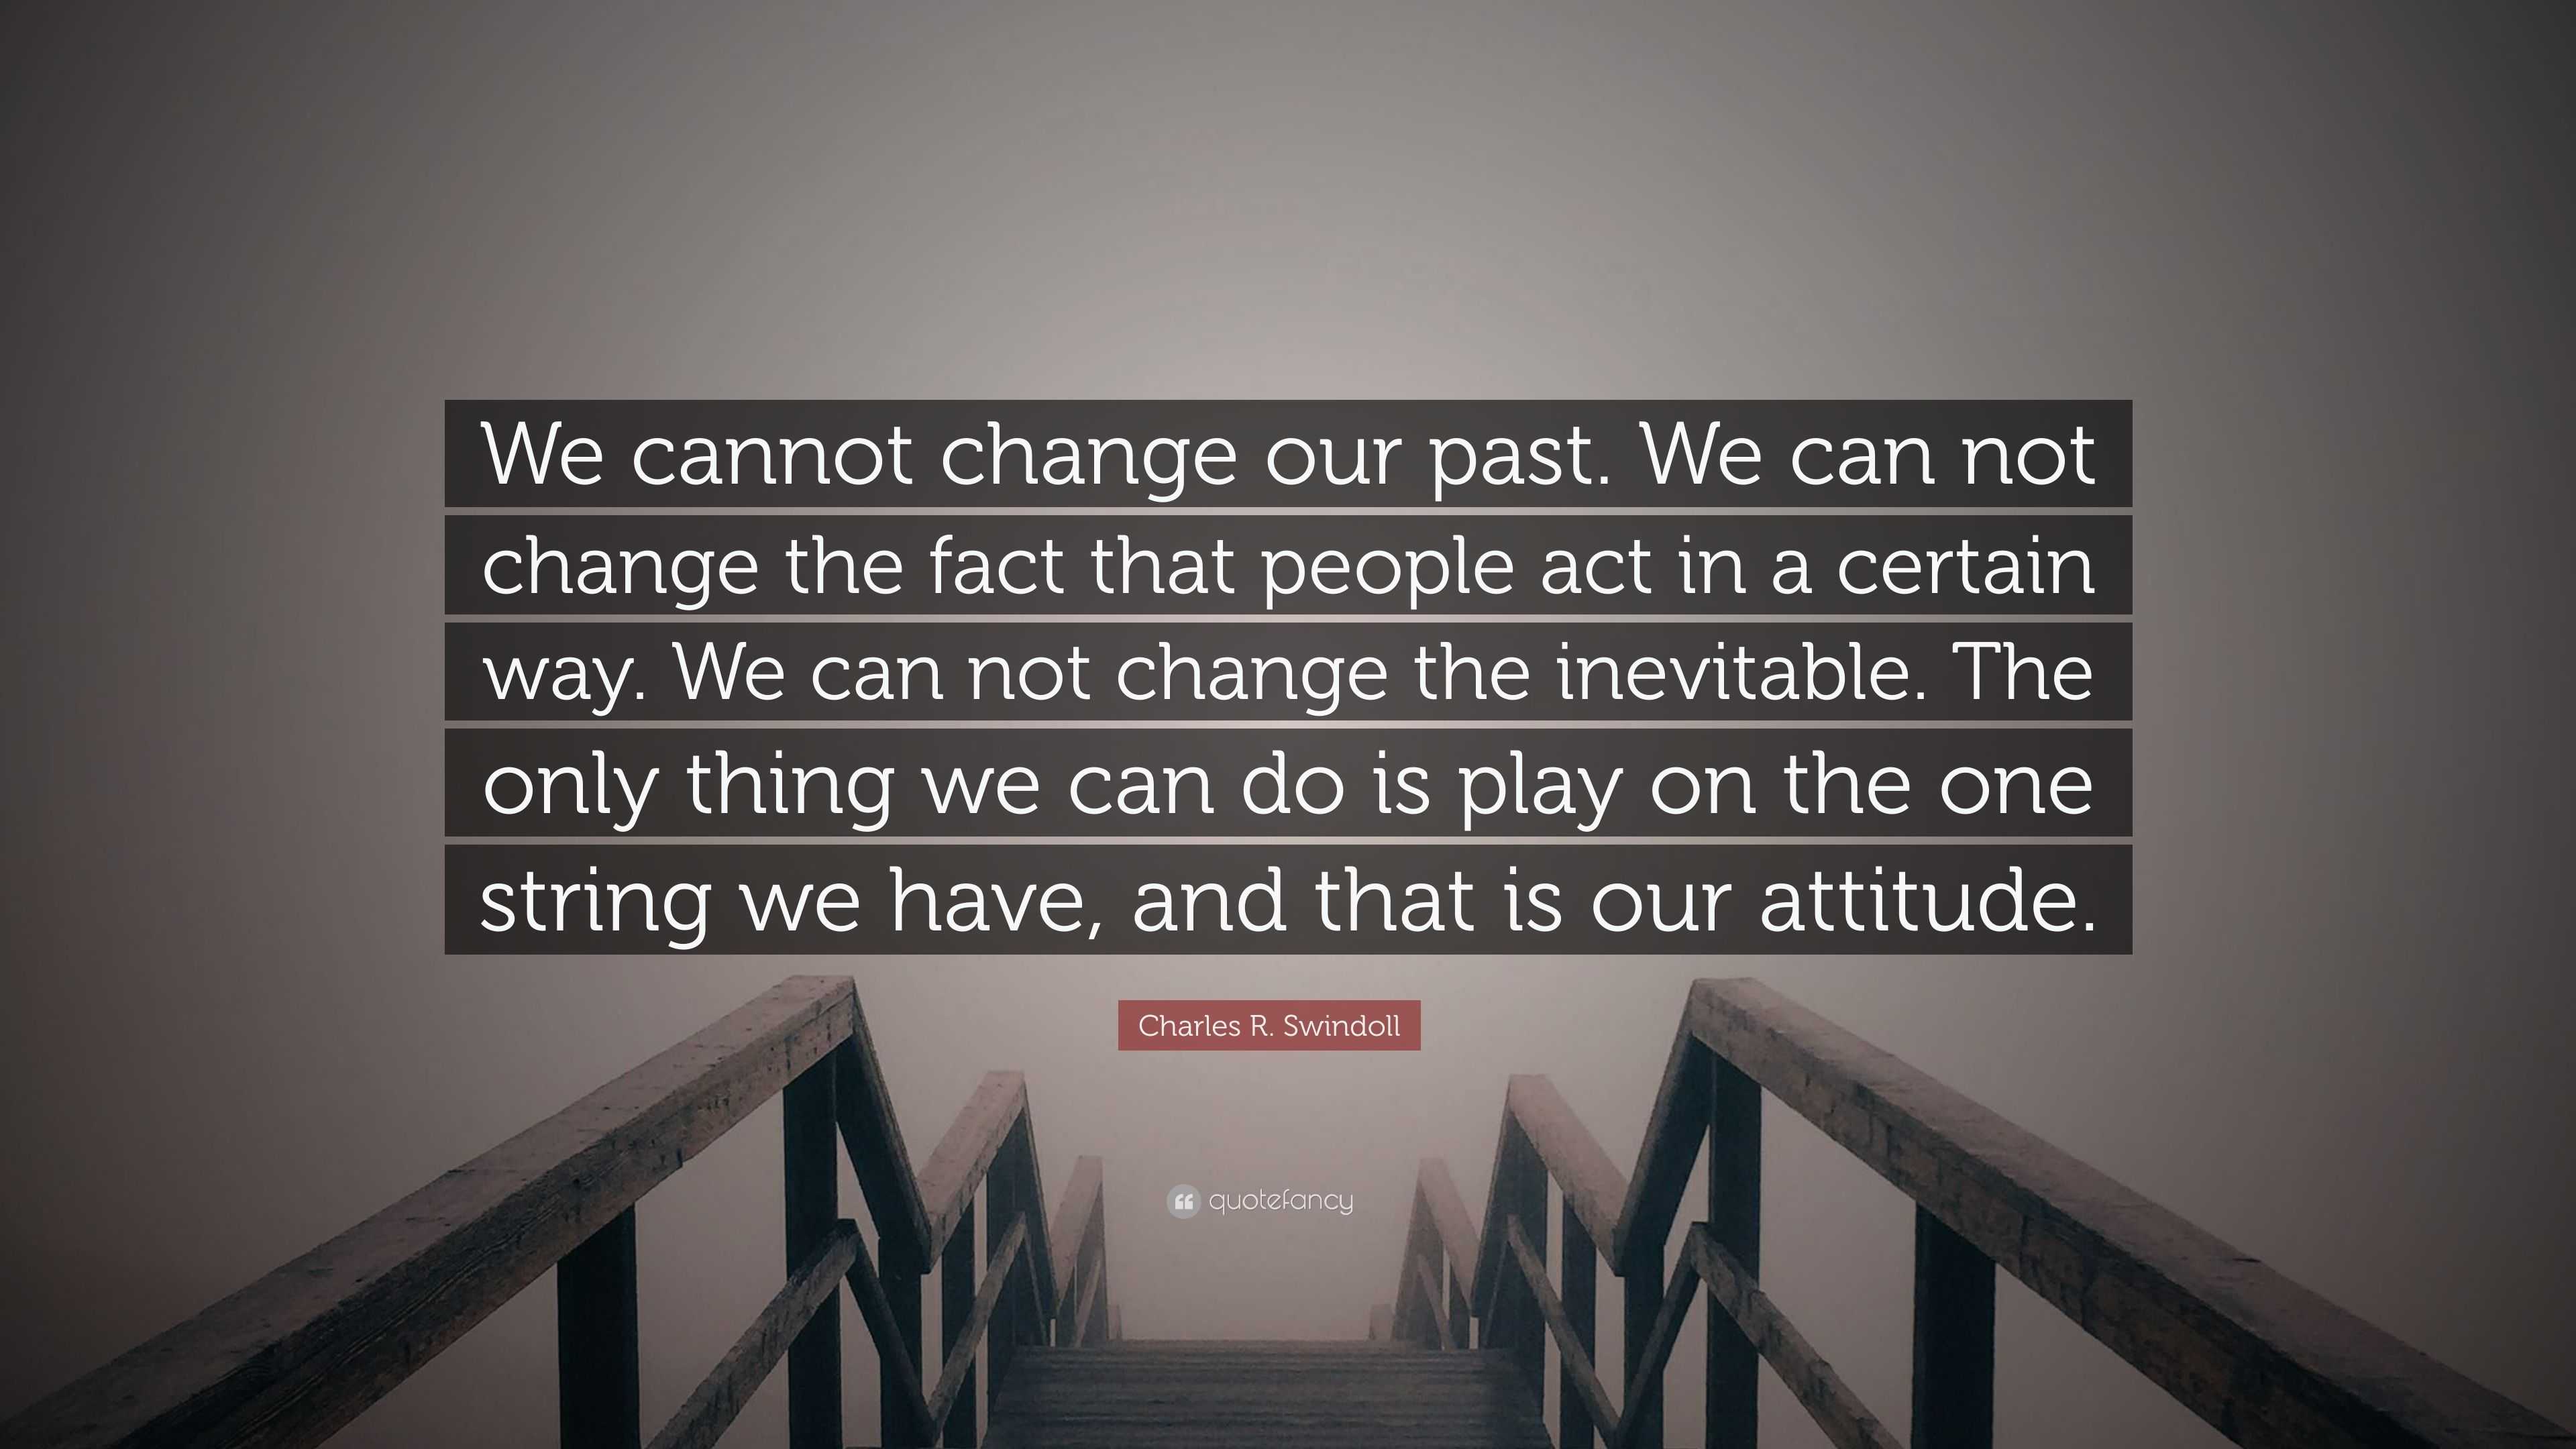 50 Reasons Why We Cannot Change … but why?